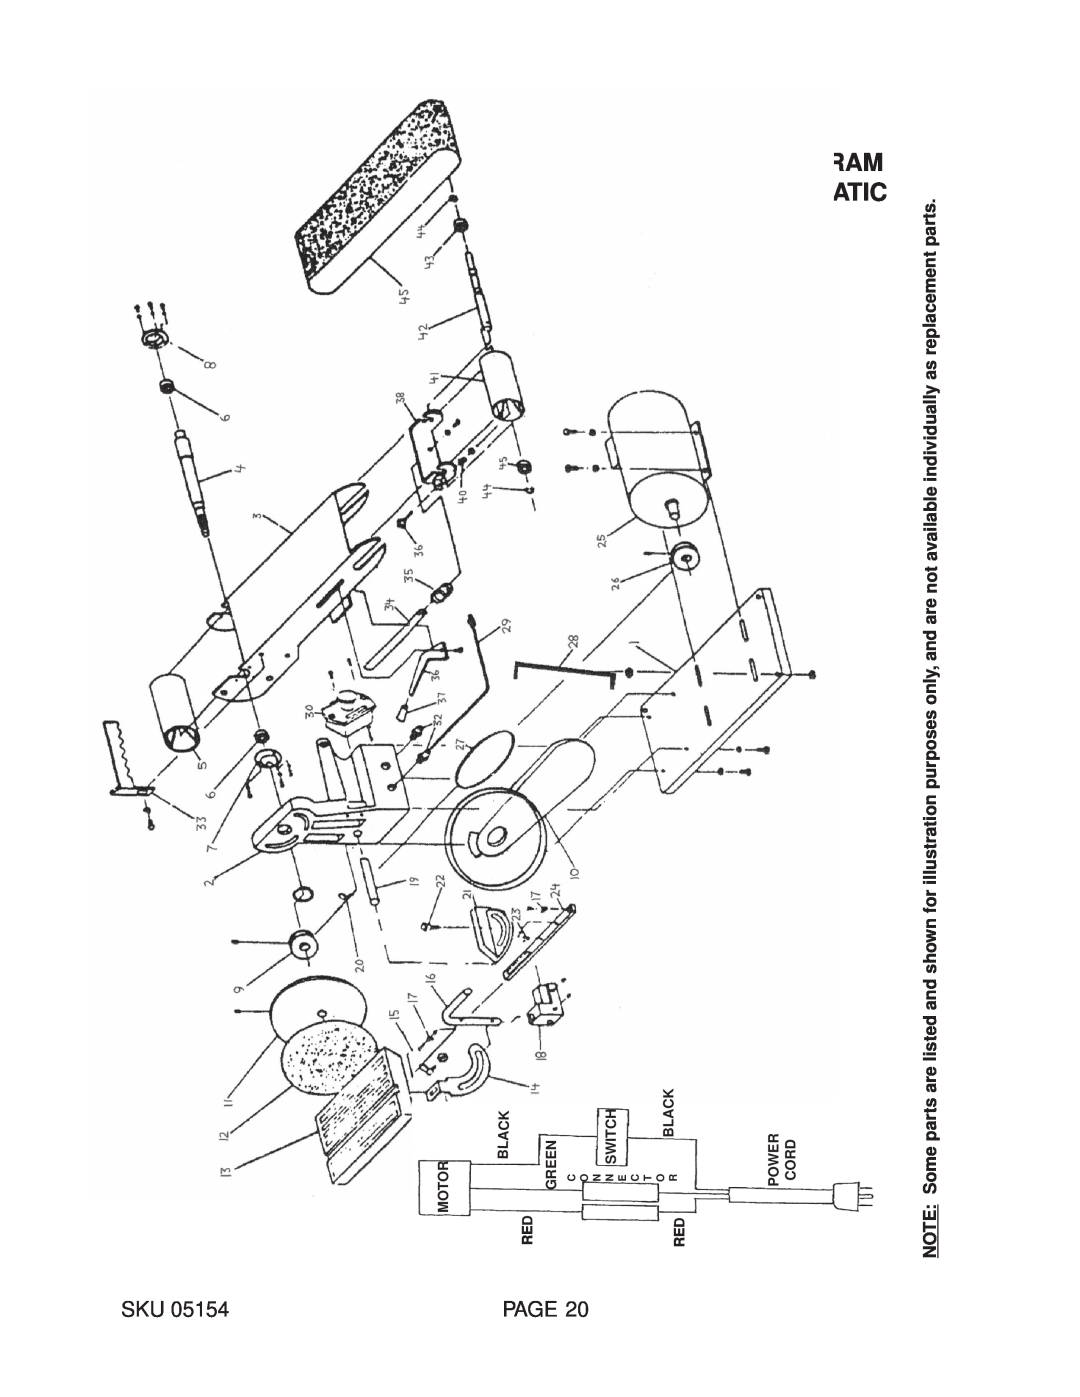 Harbor Freight Tools 05154 Assembly Diagram & Wiring Schematic, Black, Motor, Green, Power Cord, C O N Nswitch E C T O R 